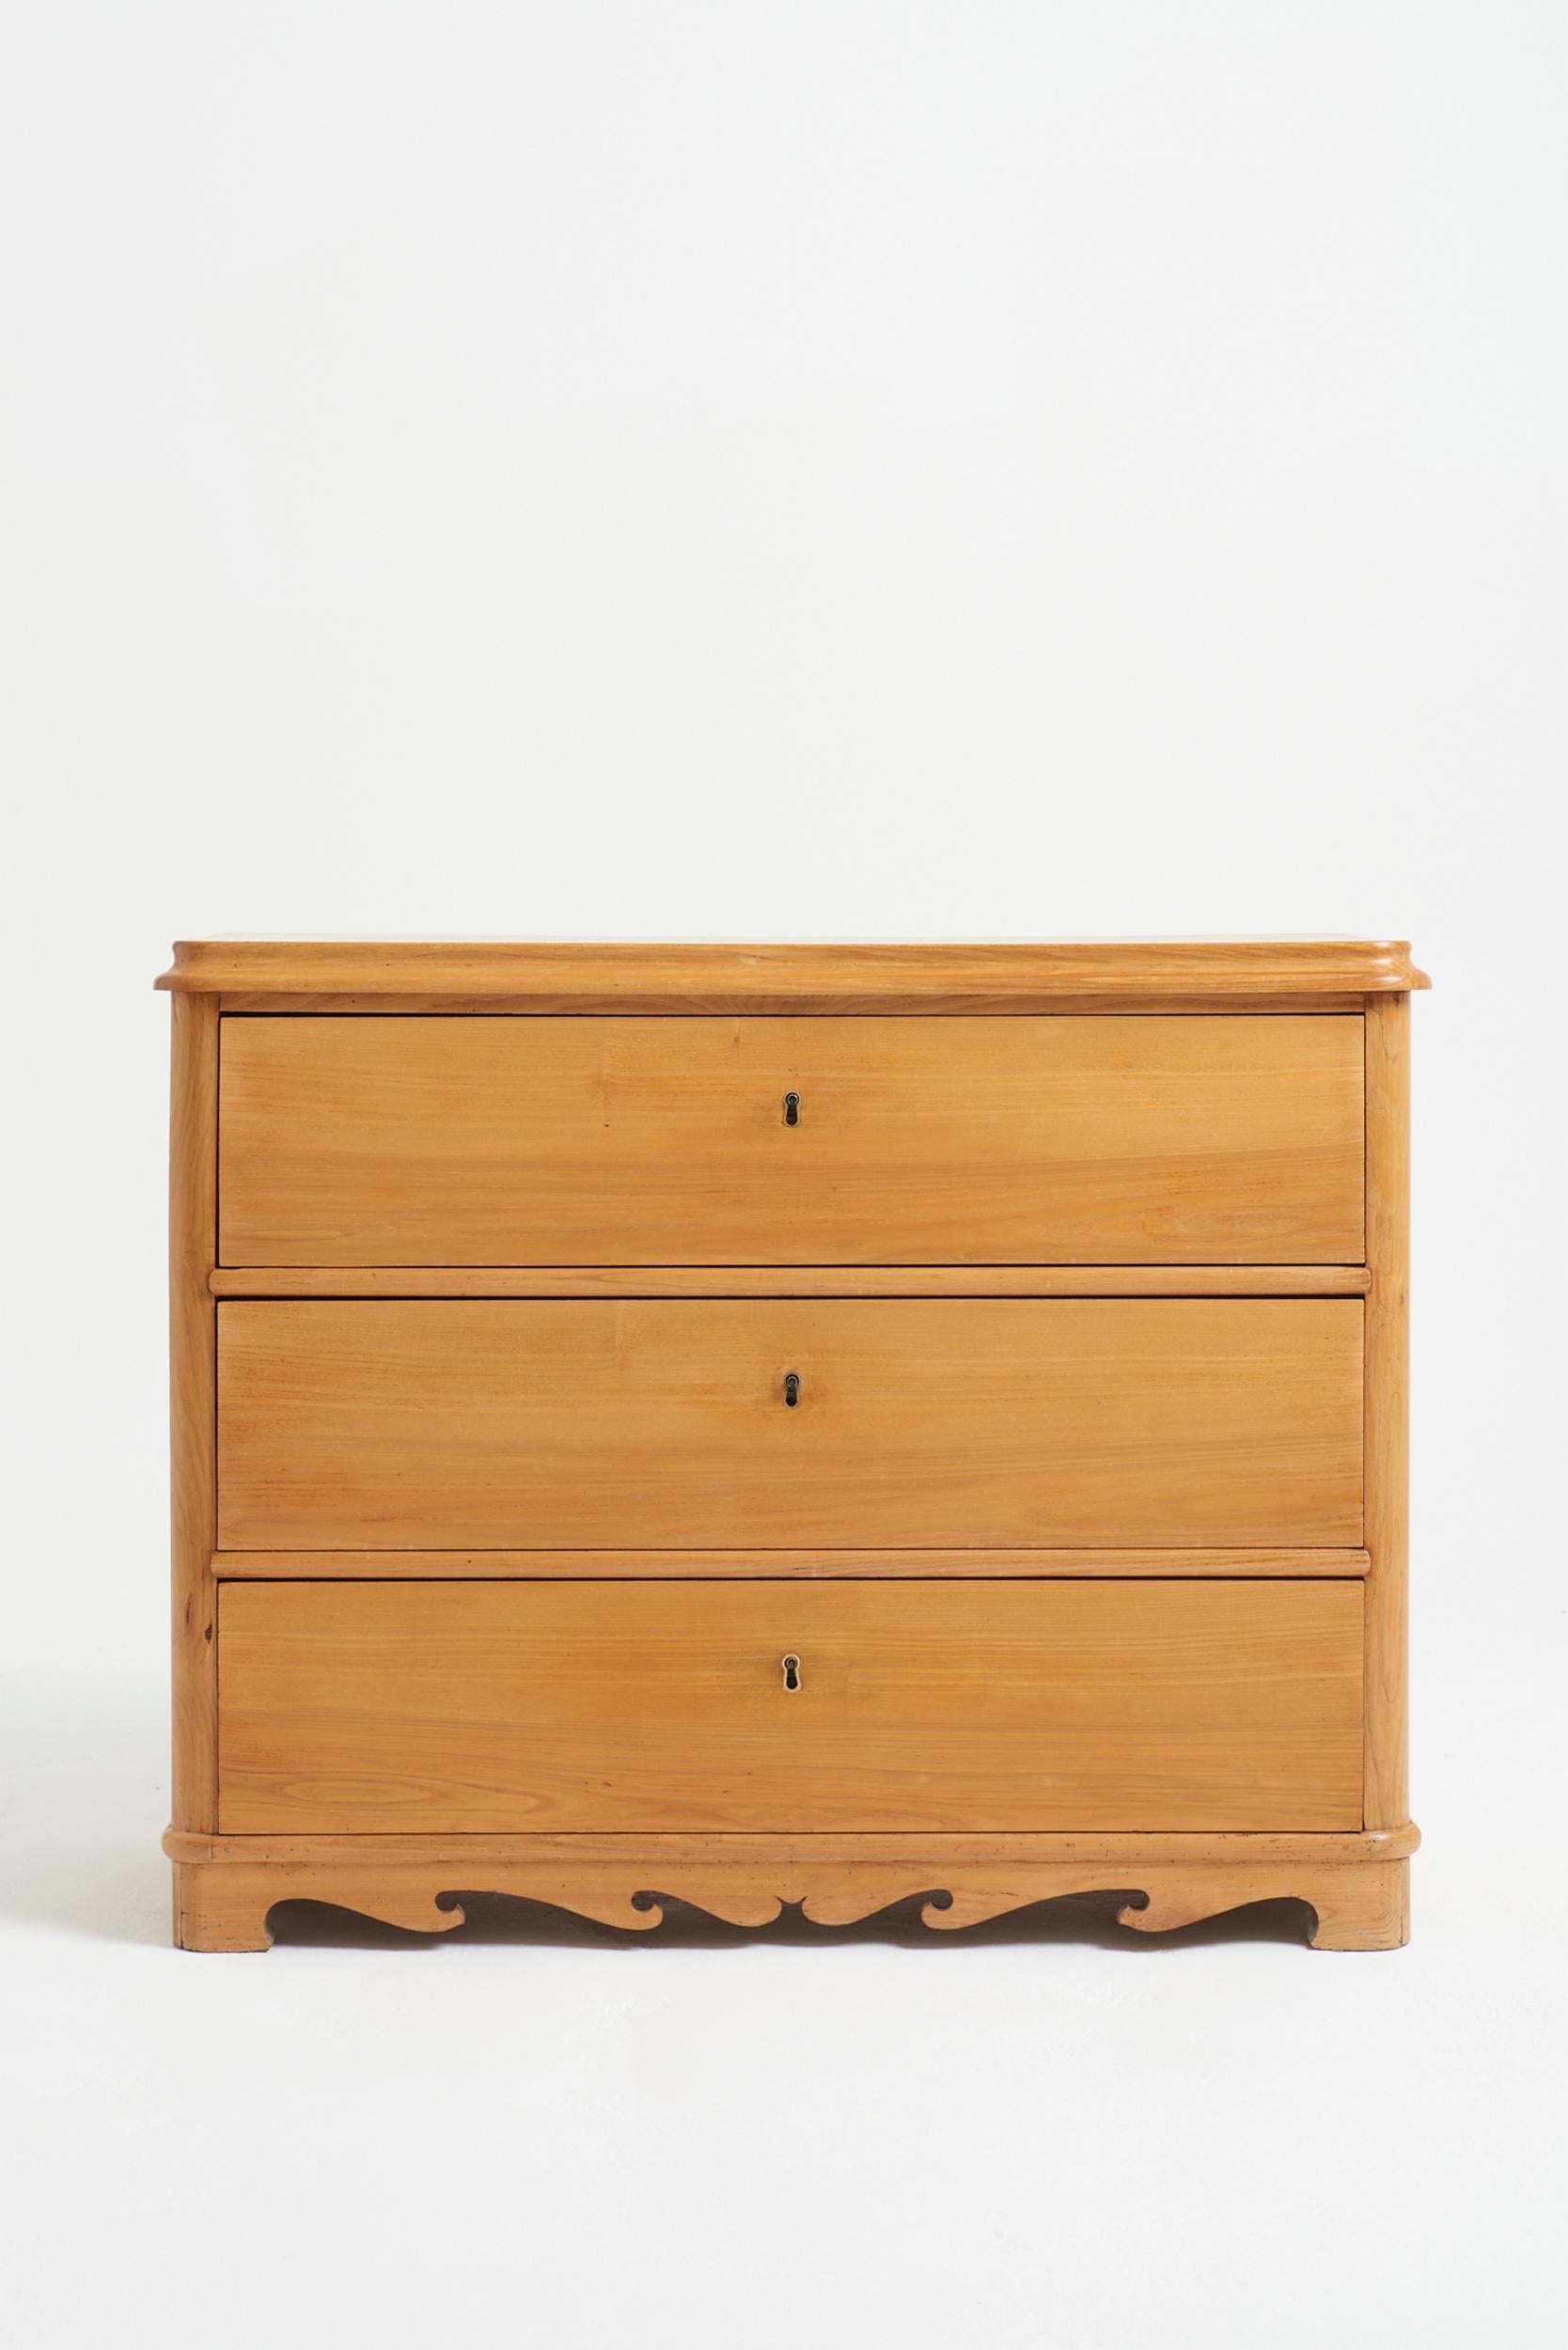 An ash chest of drawers
Sweden, 19th Century
78 cm high by 99 cm wide by 45 cm depth